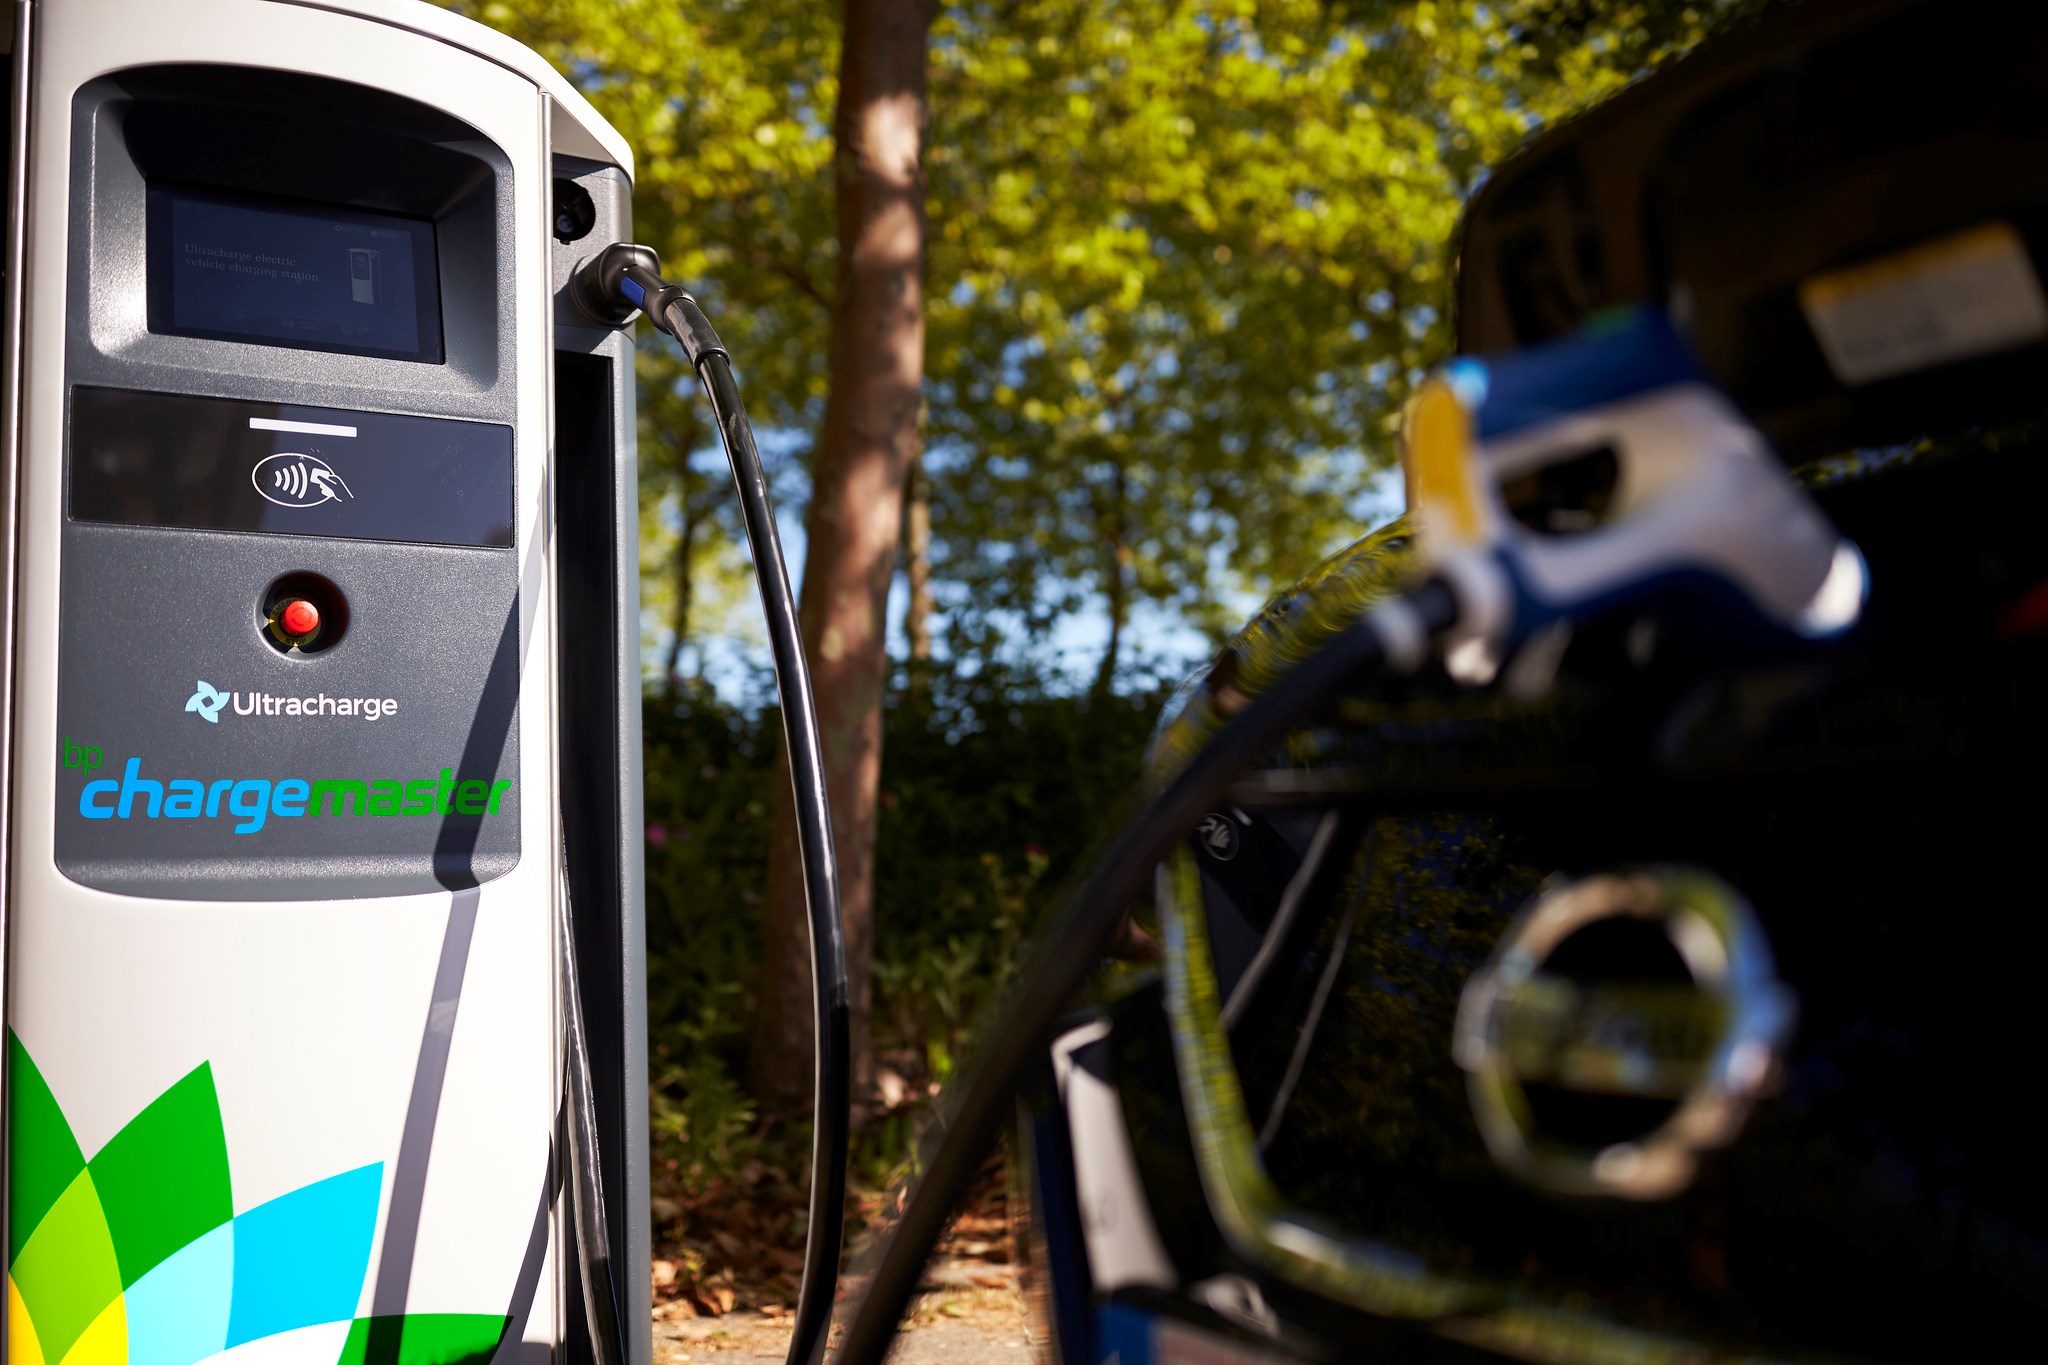 bp expands access to EV charge points for Fuel & Charge customers